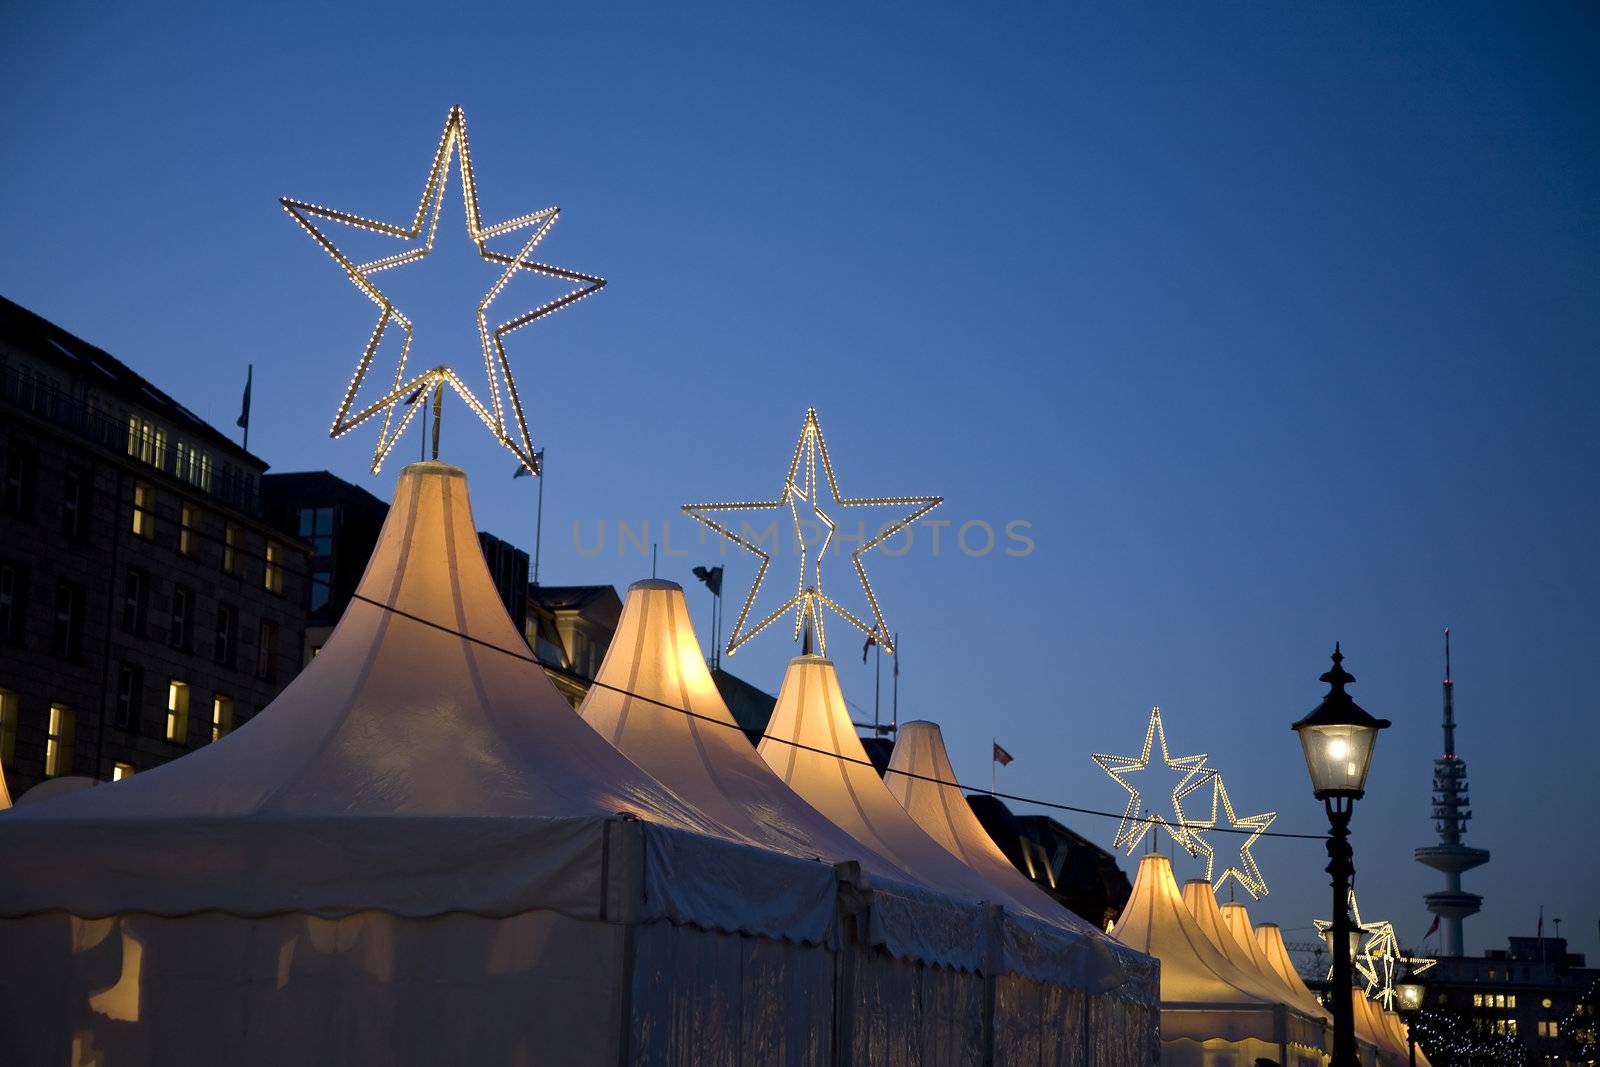 Top of tents with stars - Christmas Market, Hamburg - Germany. Space for text.